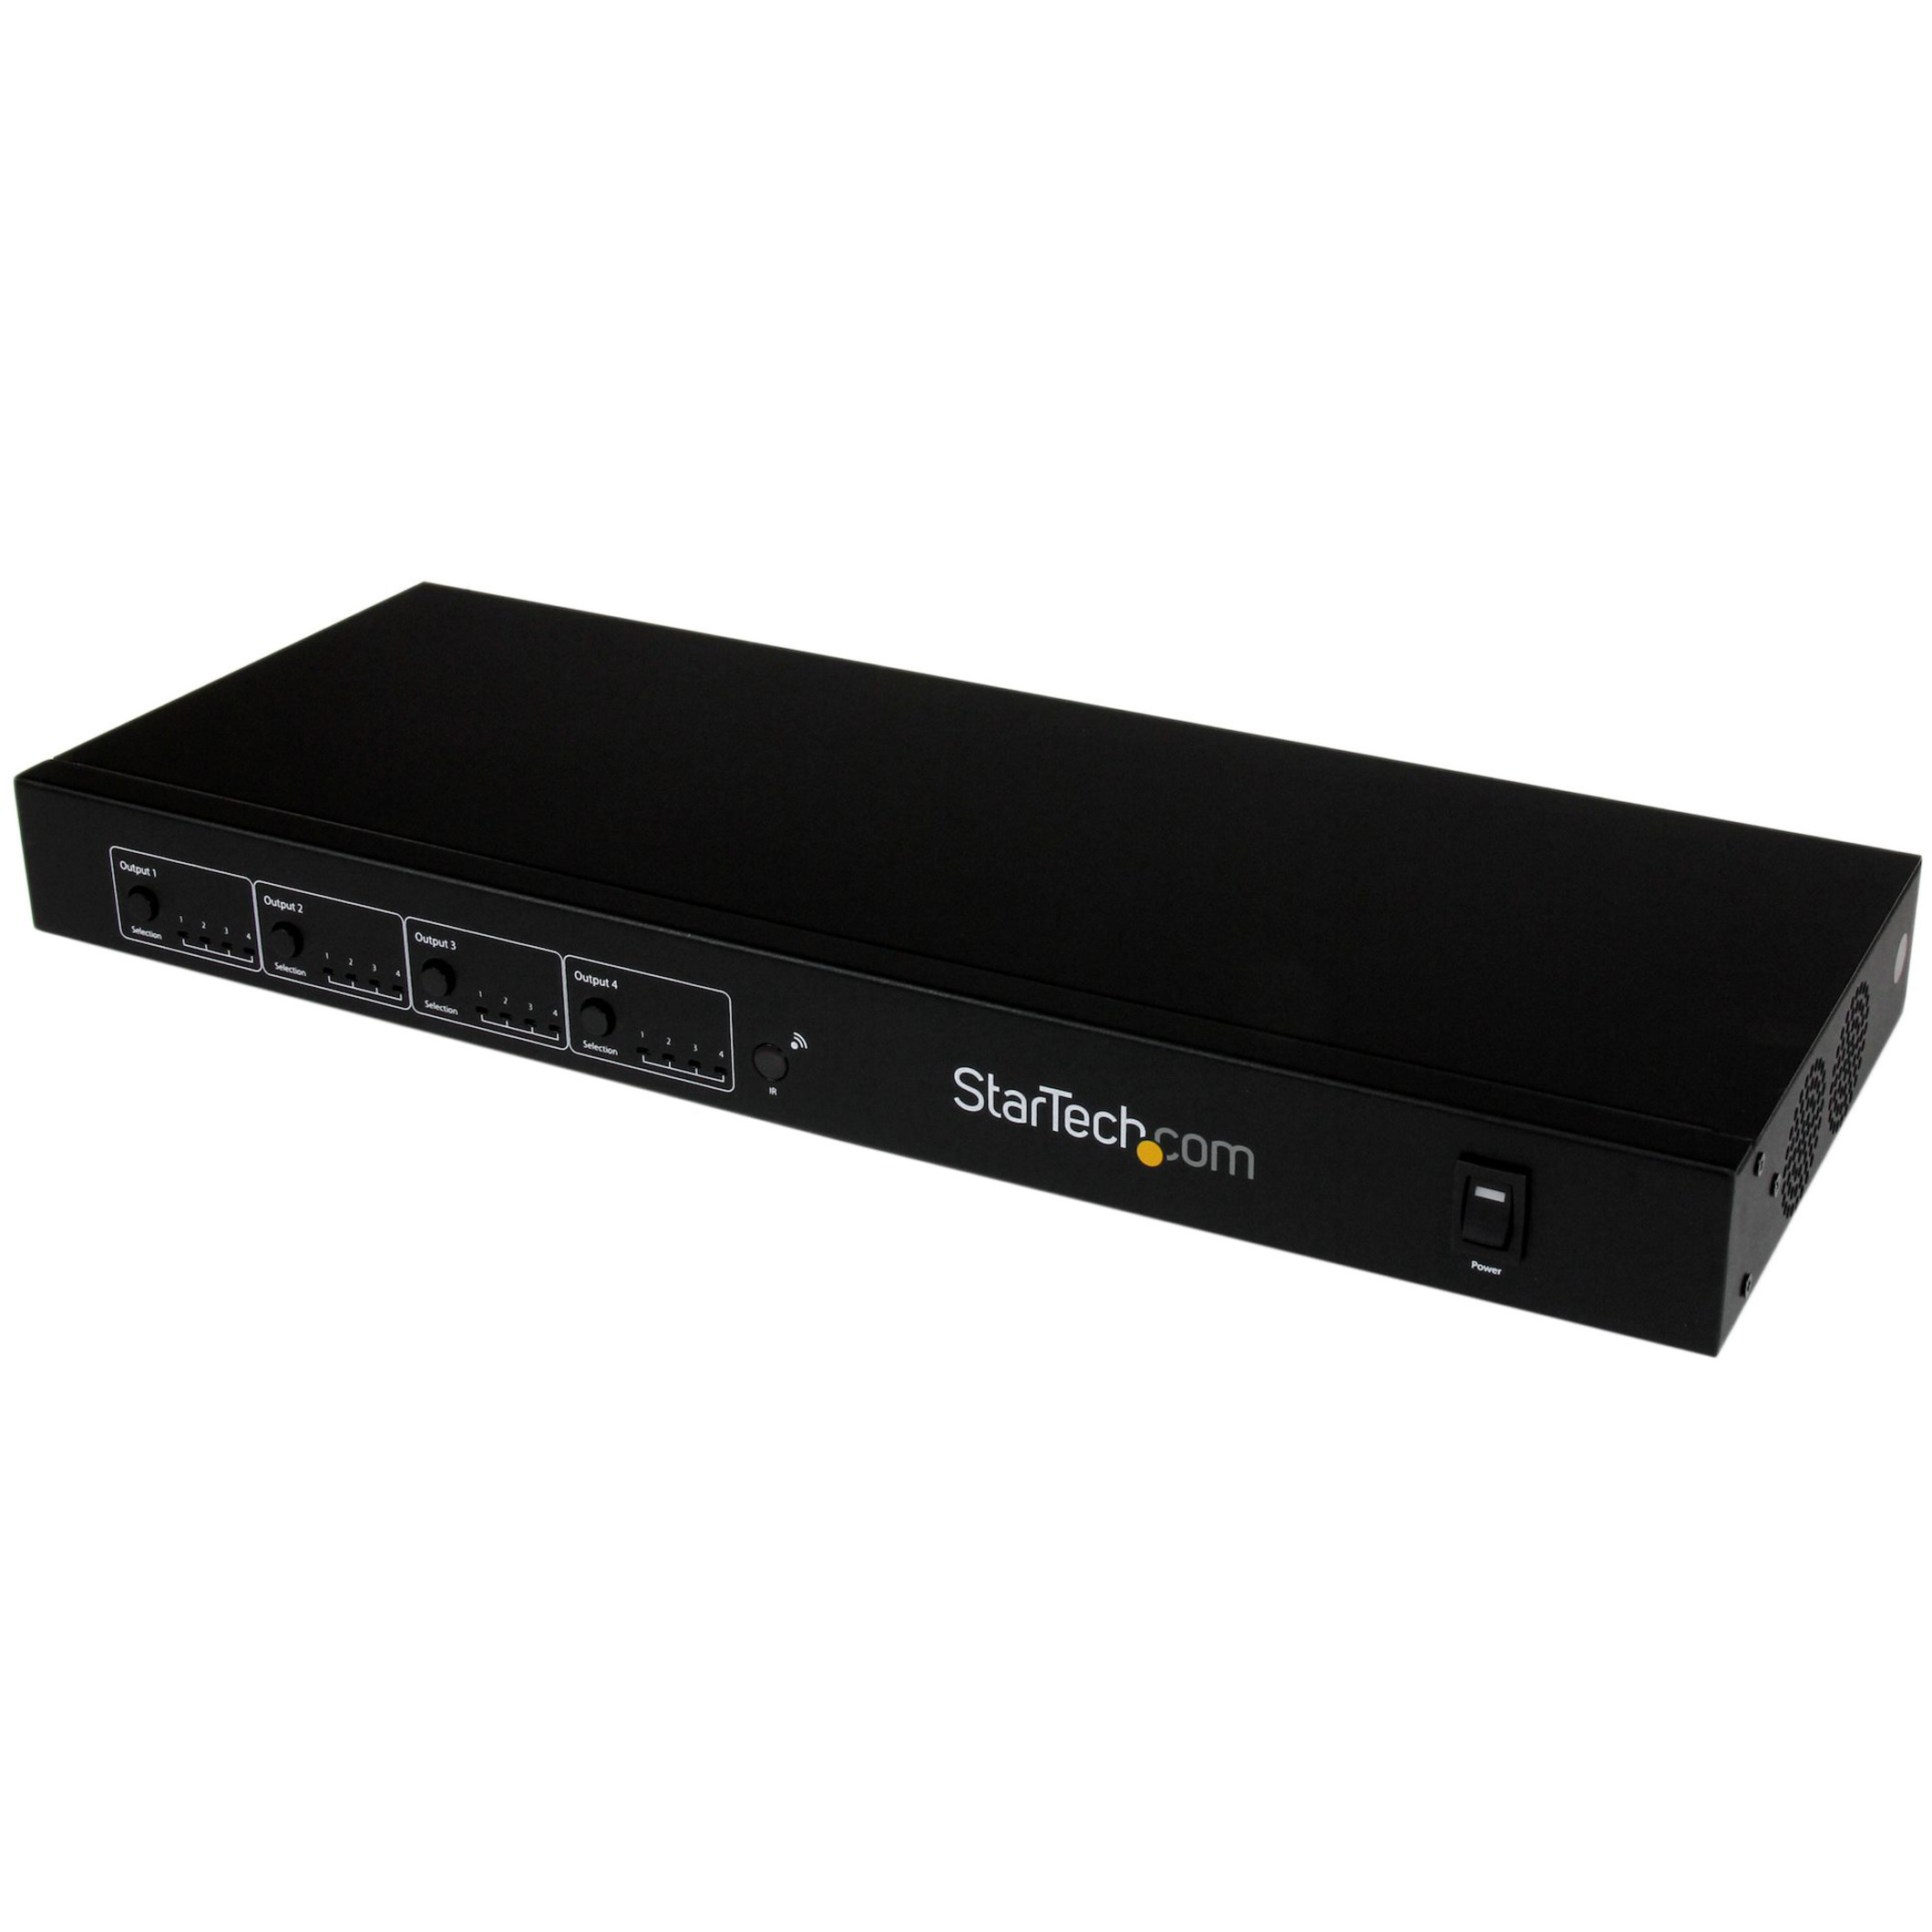 snyde Express Vestlig Startech .com 4x4 HDMI Matrix Switcher and HDMI over HDBaseT CAT5  Extender230ft (70m)1080pShare and extend four HDMI video sources up...  ST424HDBT - Corporate Armor